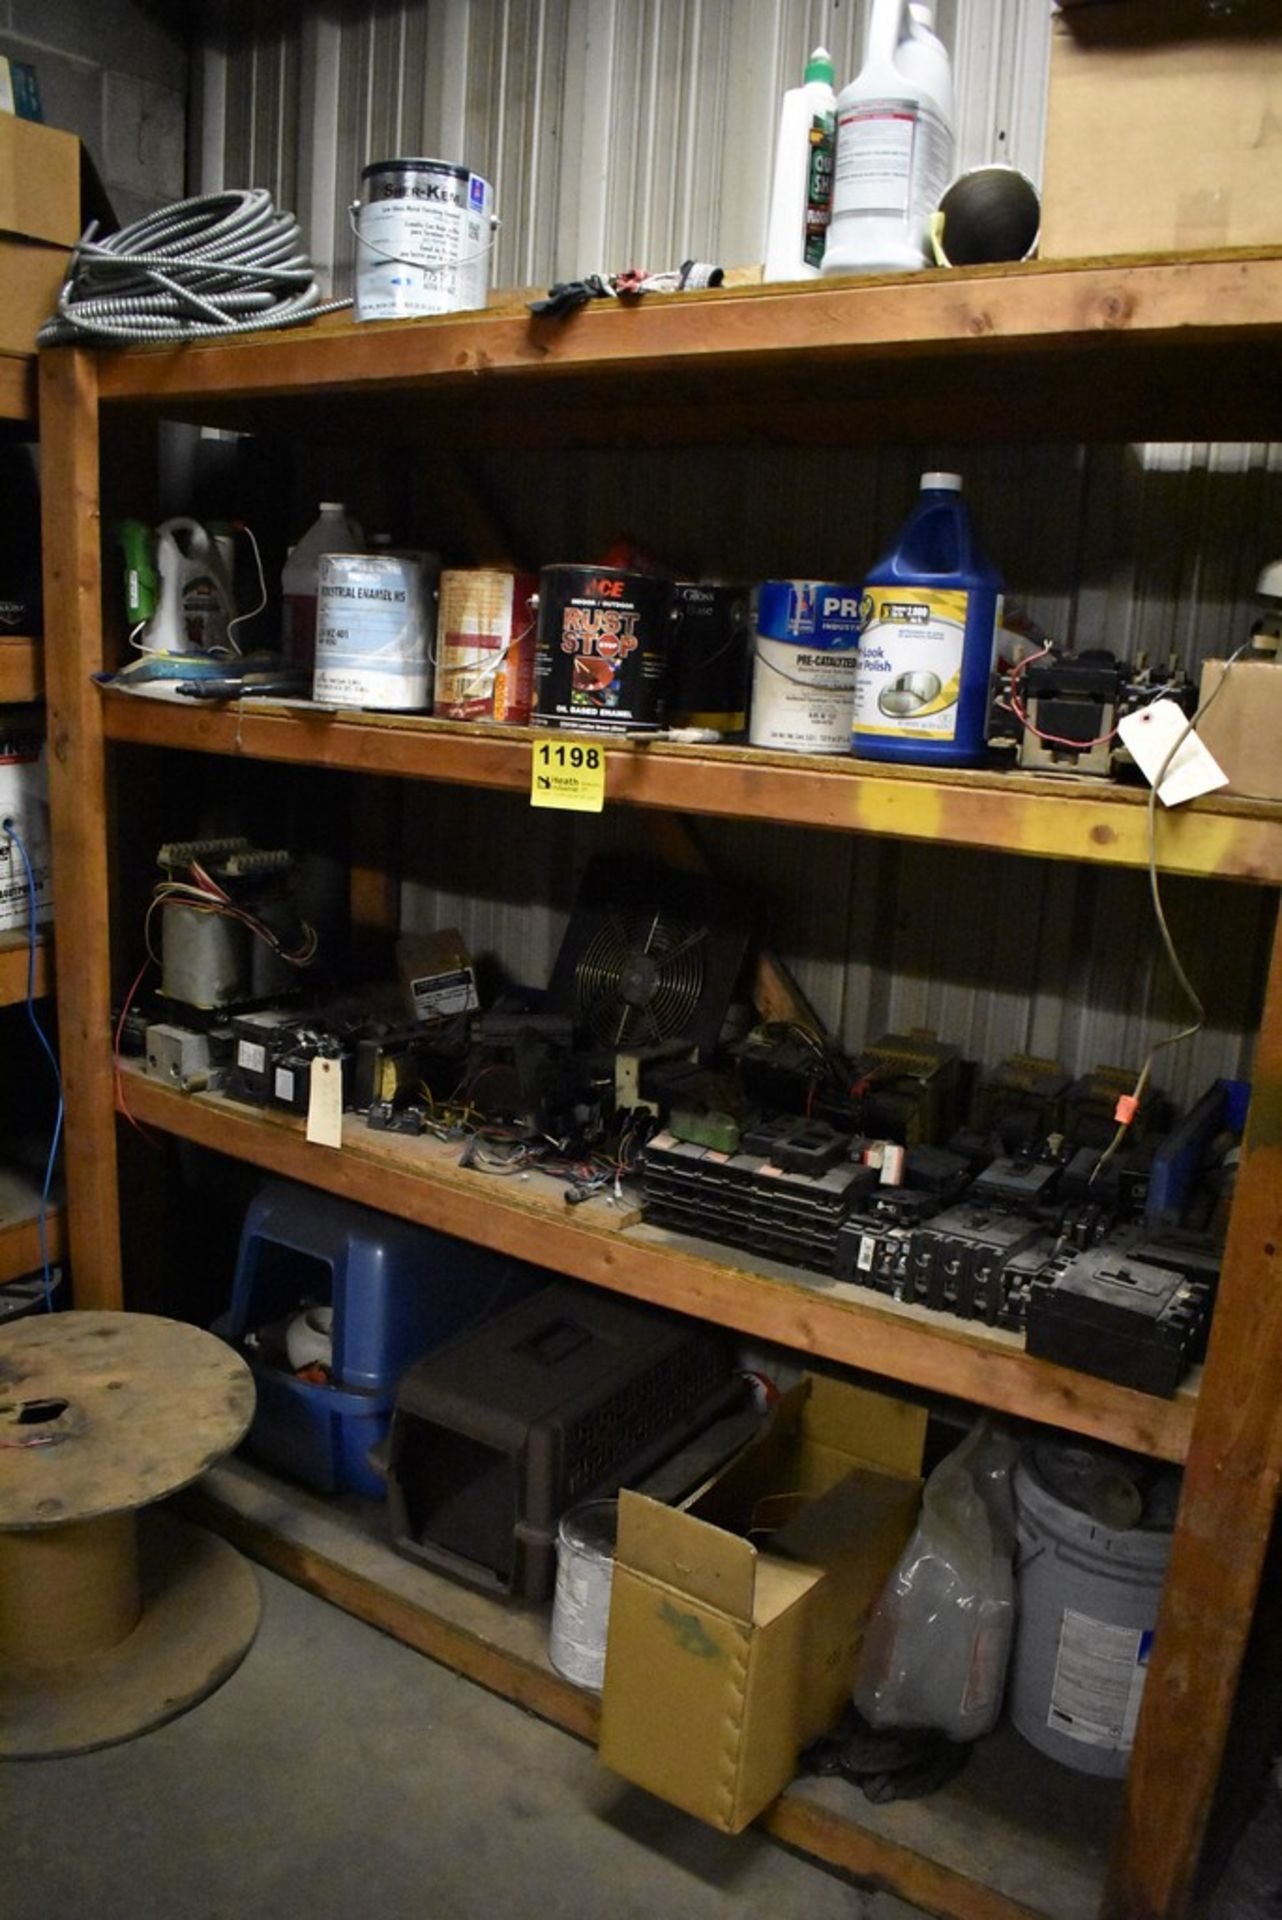 CONTENTS ON SHELF: ELECTRICAL PARTS & PAINTING SUPPLIES